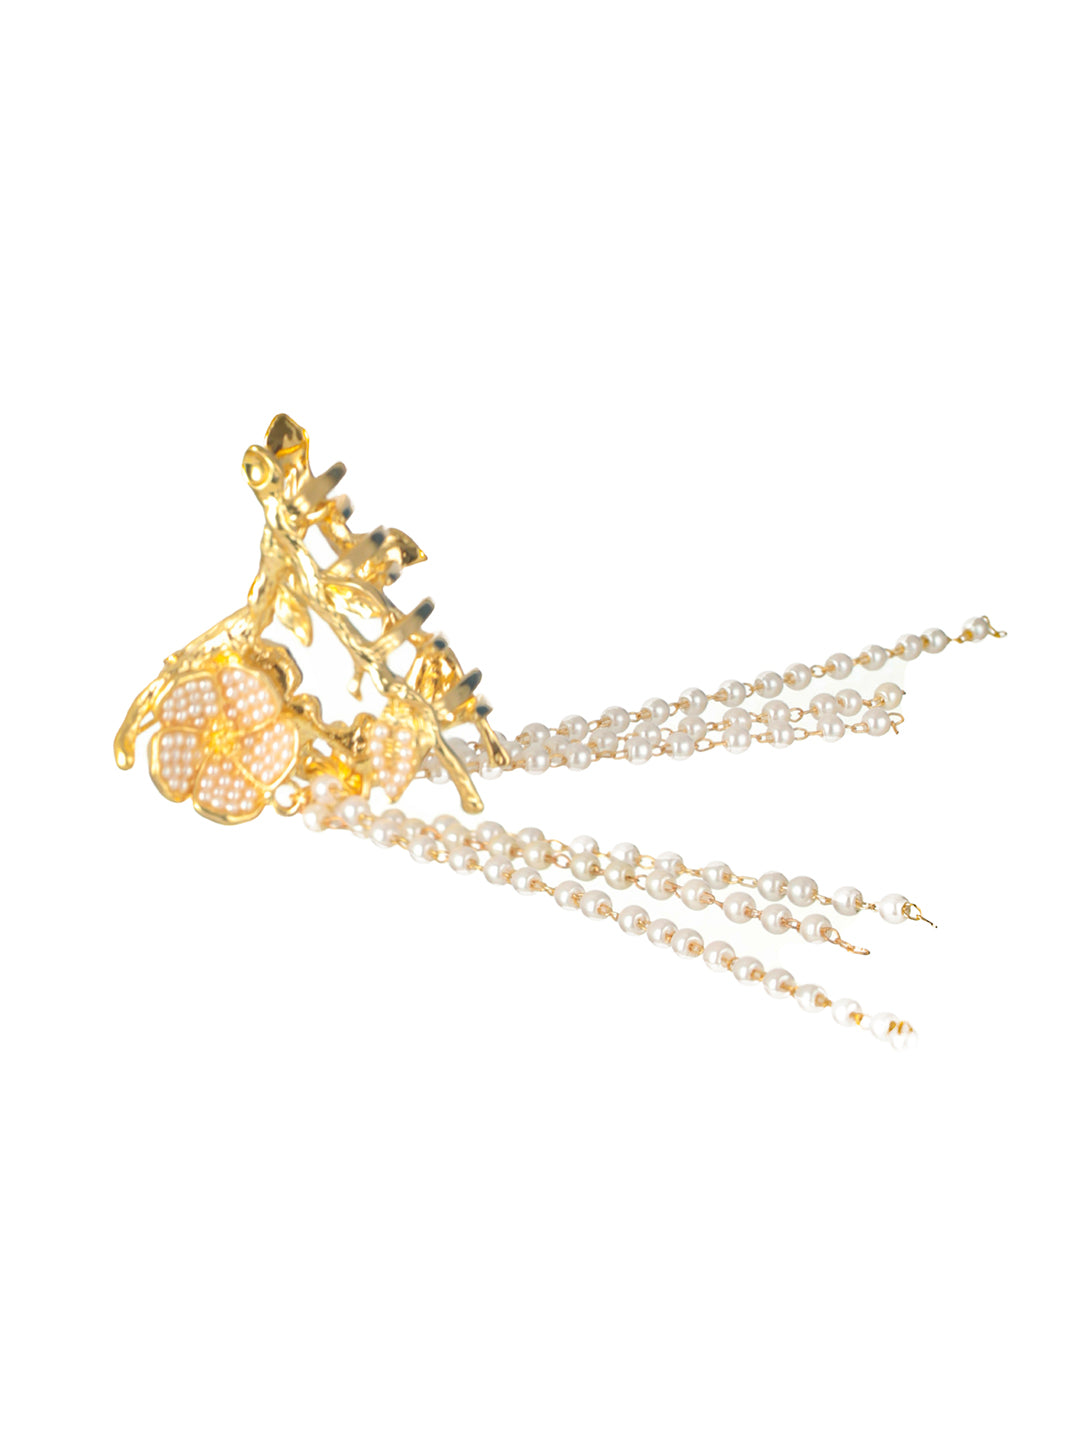 Priyaasi Floral Pearl Tasseled Gold-Plated Claw Clip